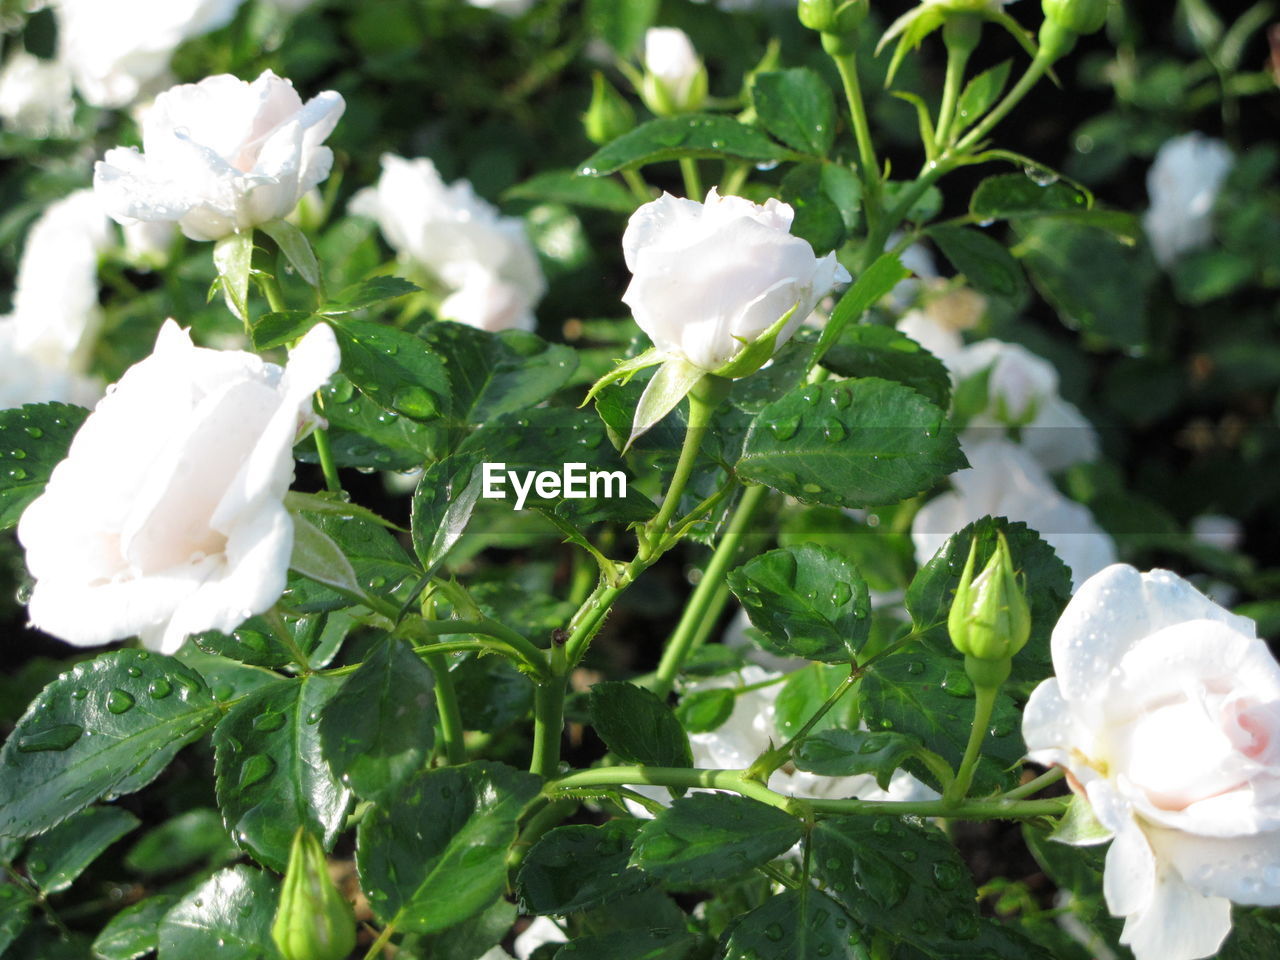 CLOSE-UP OF WHITE ROSES ON PLANT